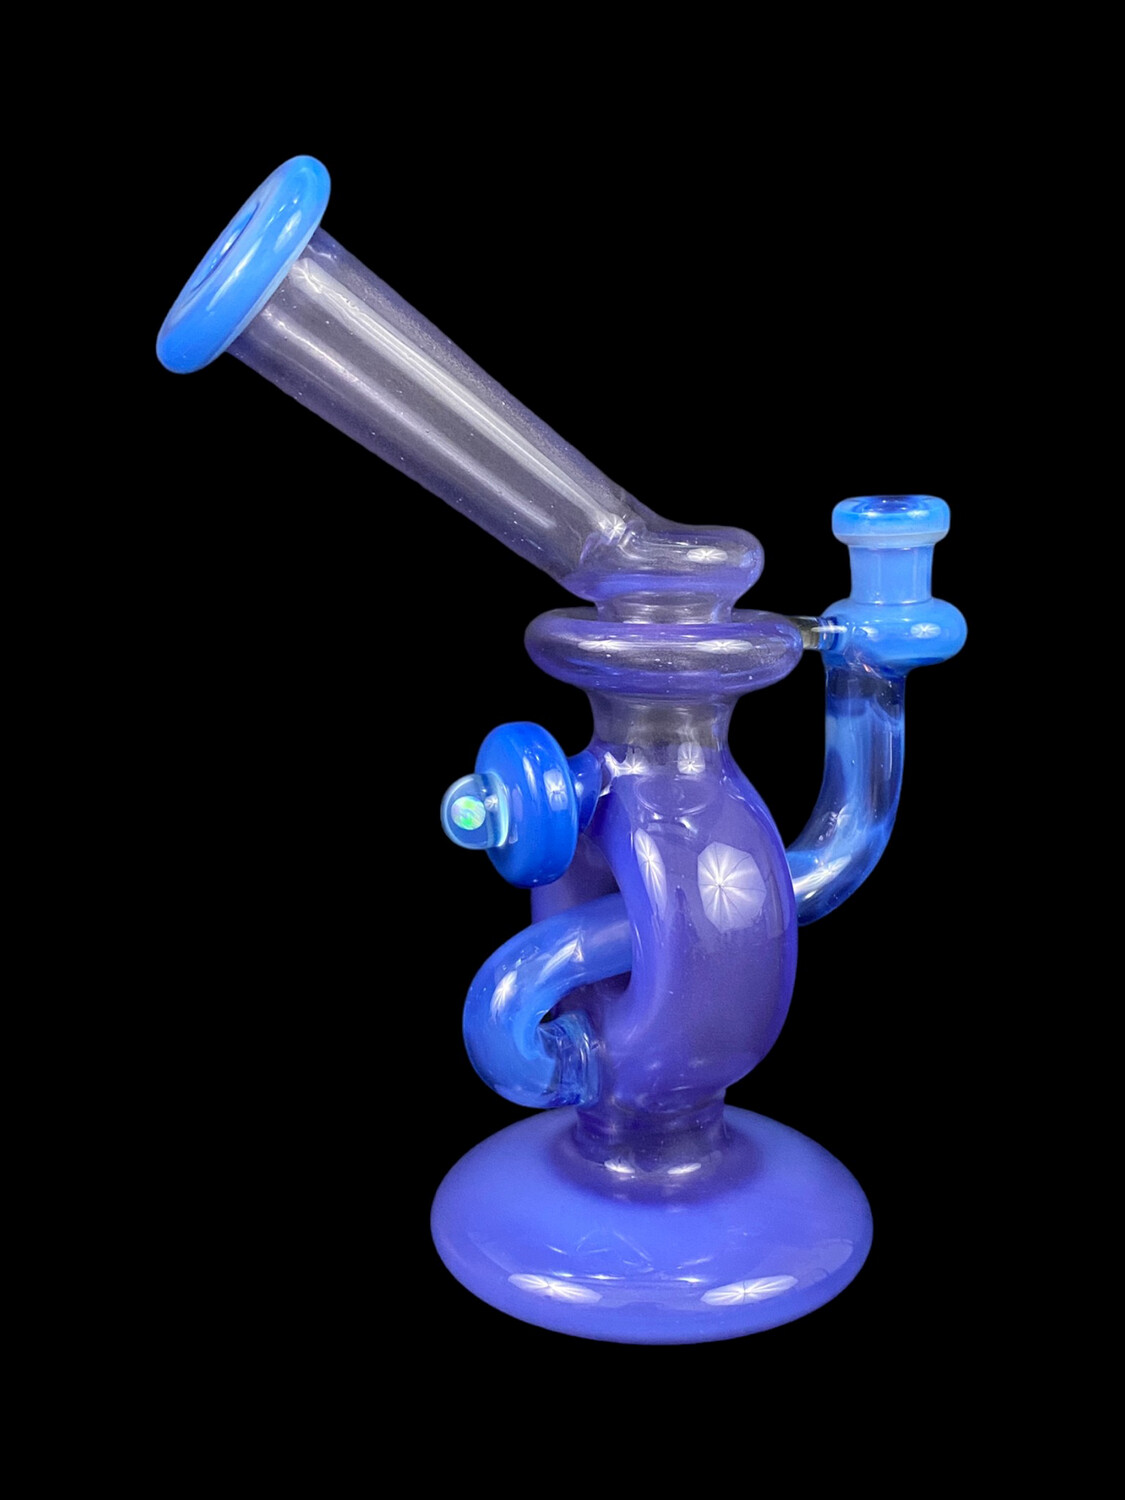 "Tubes and Turbines" Kevlar Glass - V1 Turbine Greasy Purple and Blue